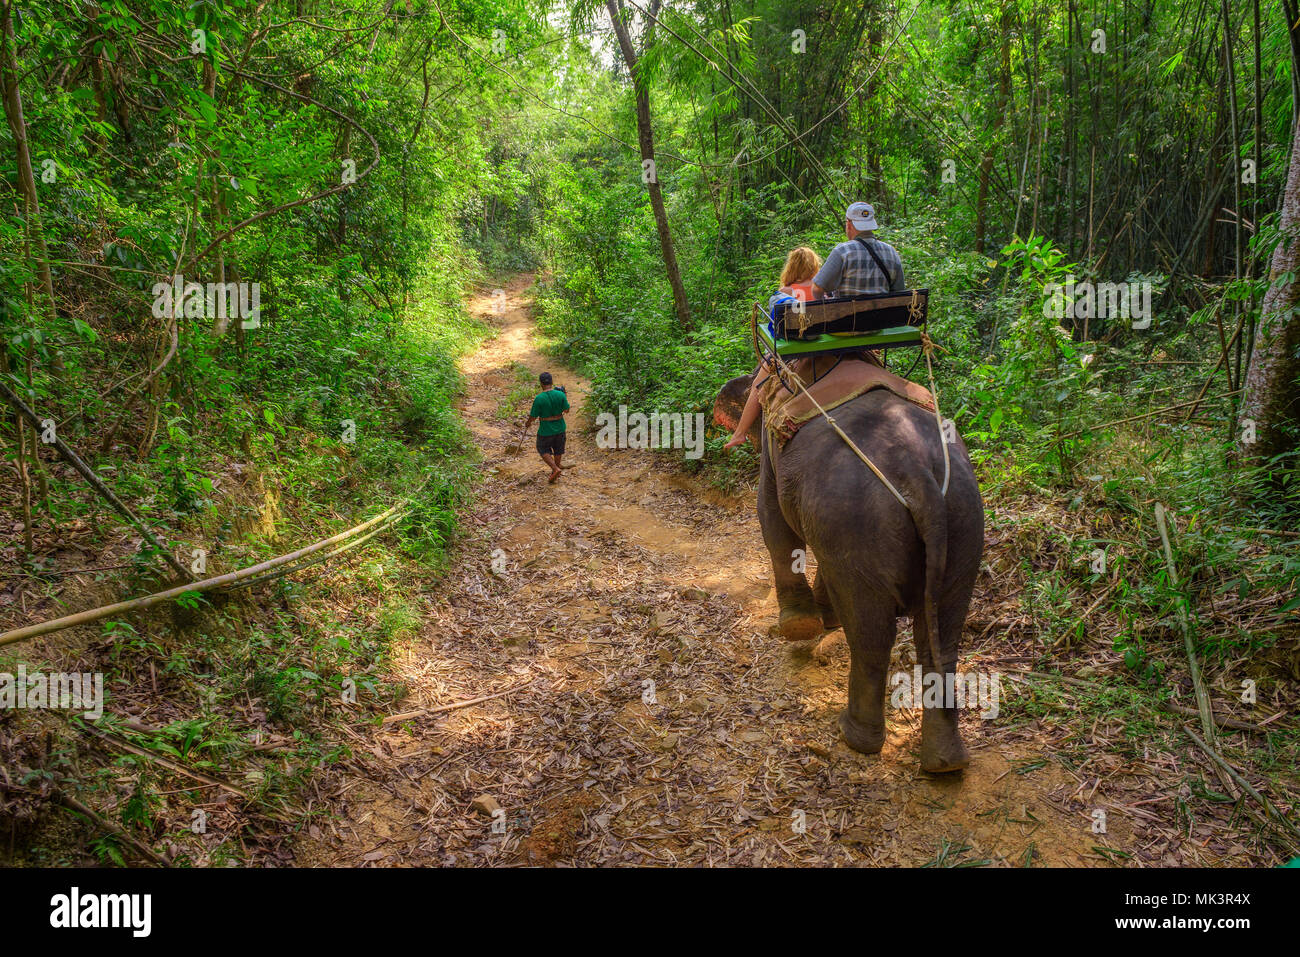 Tourists riding an elephant in Thailand Stock Photo